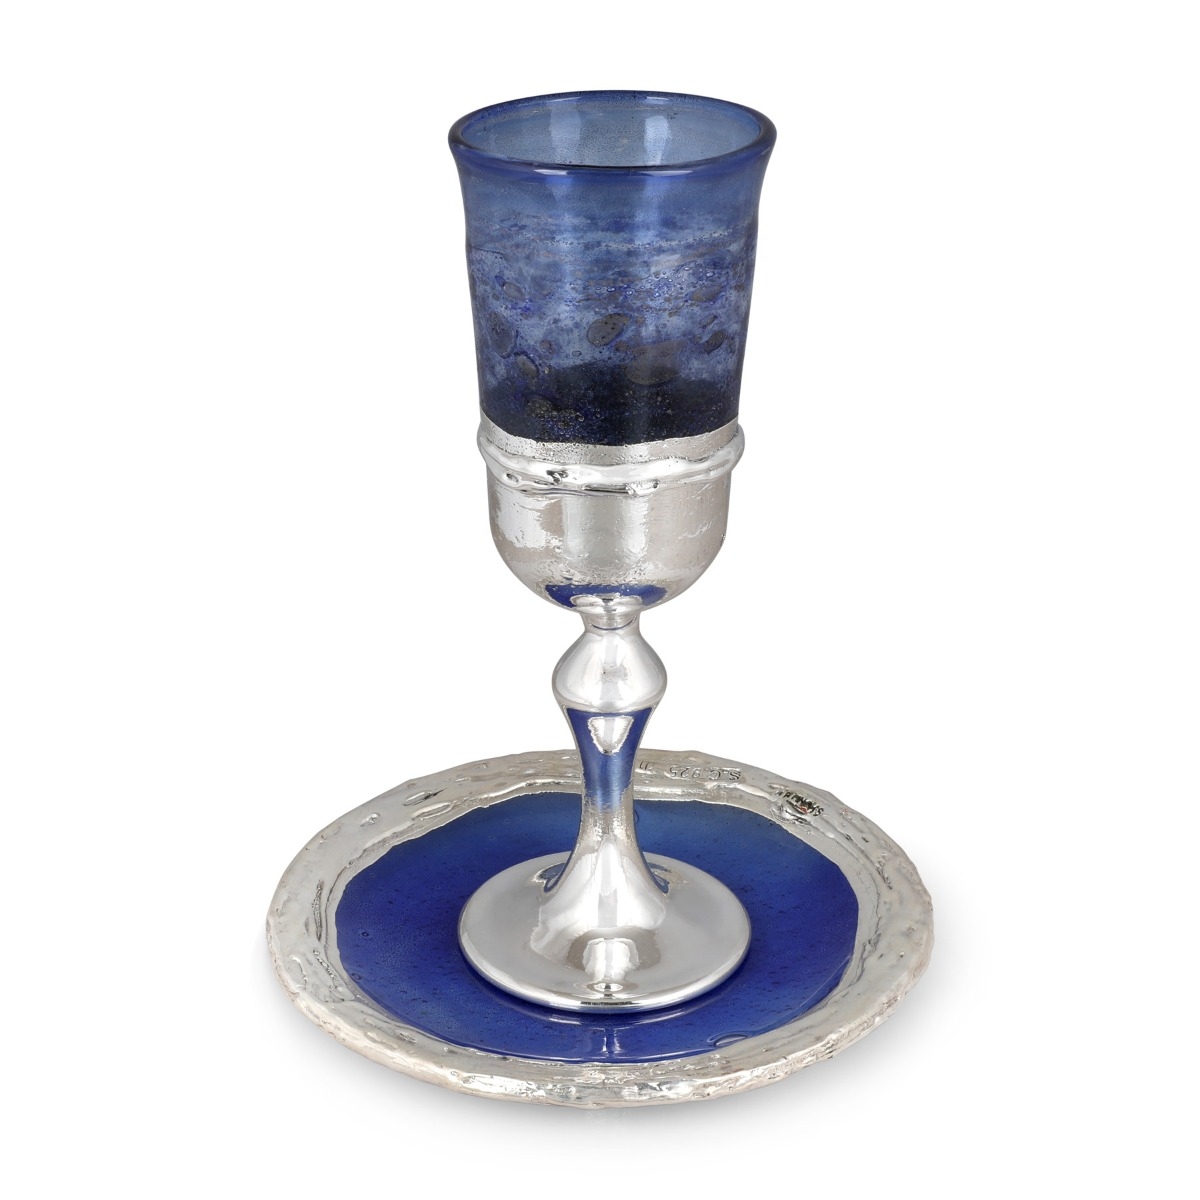 Handmade Blue Glass and Sterling Silver-Plated Kiddush Cup - 2